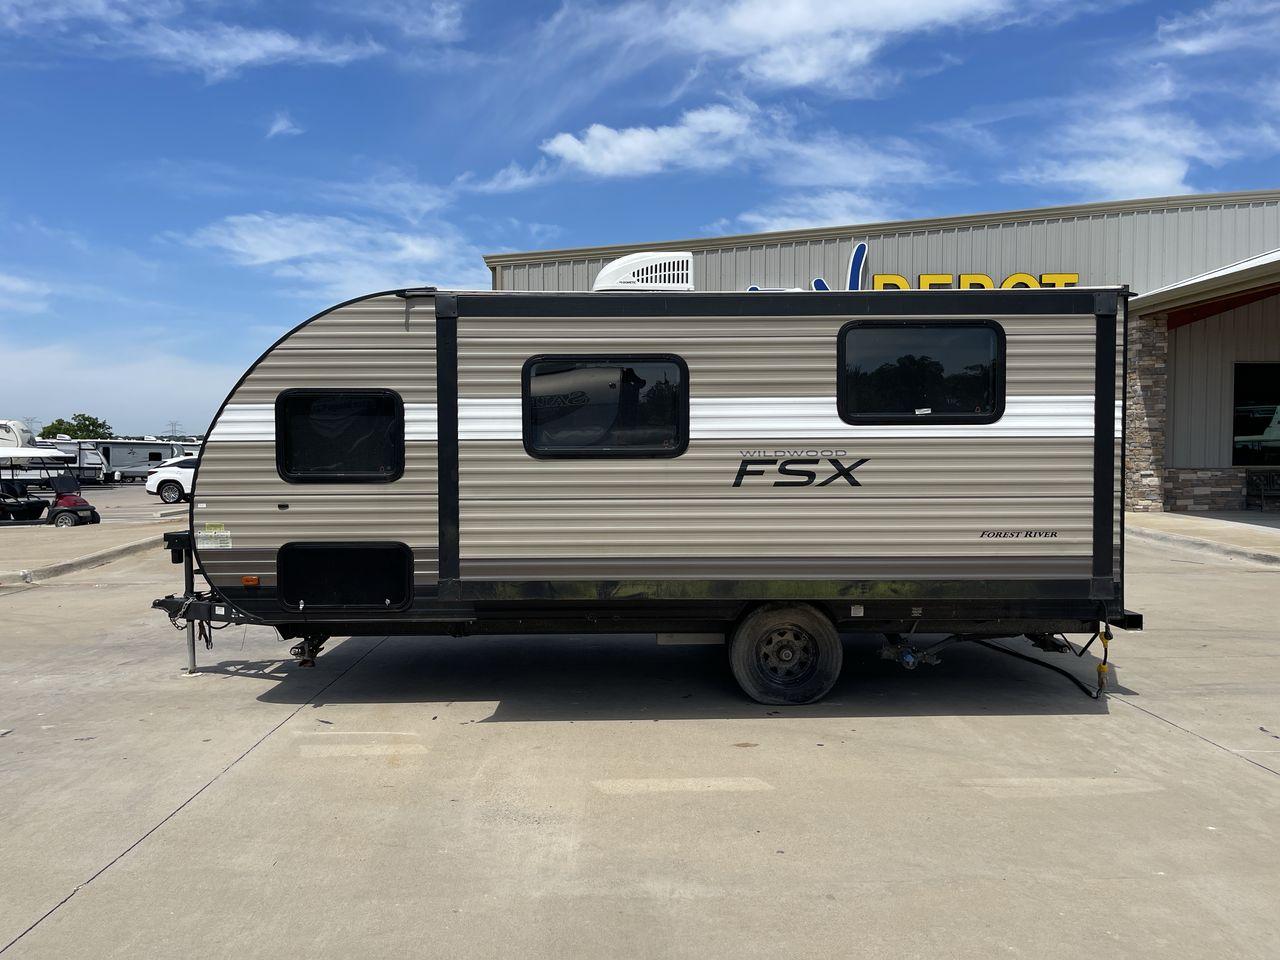 2018 WILDWOOD FSX 190SS (4X4TWDU1XJY) , Length: 22.58 ft. | Dry Weight: 3,474 lbs. | Slides: 1 transmission, located at 4319 N Main Street, Cleburne, TX, 76033, (817) 221-0660, 32.435829, -97.384178 - With the 2018 Wildwood FSX 190SS Travel Trailer, a model that flawlessly strikes the right mix between utility and convenience, set out on a small yet cozy journey. With a length of 22.58 feet, this travel trailer is crafted to offer a comfortable and pleasant journey on the road. With a robust wood - Photo #22